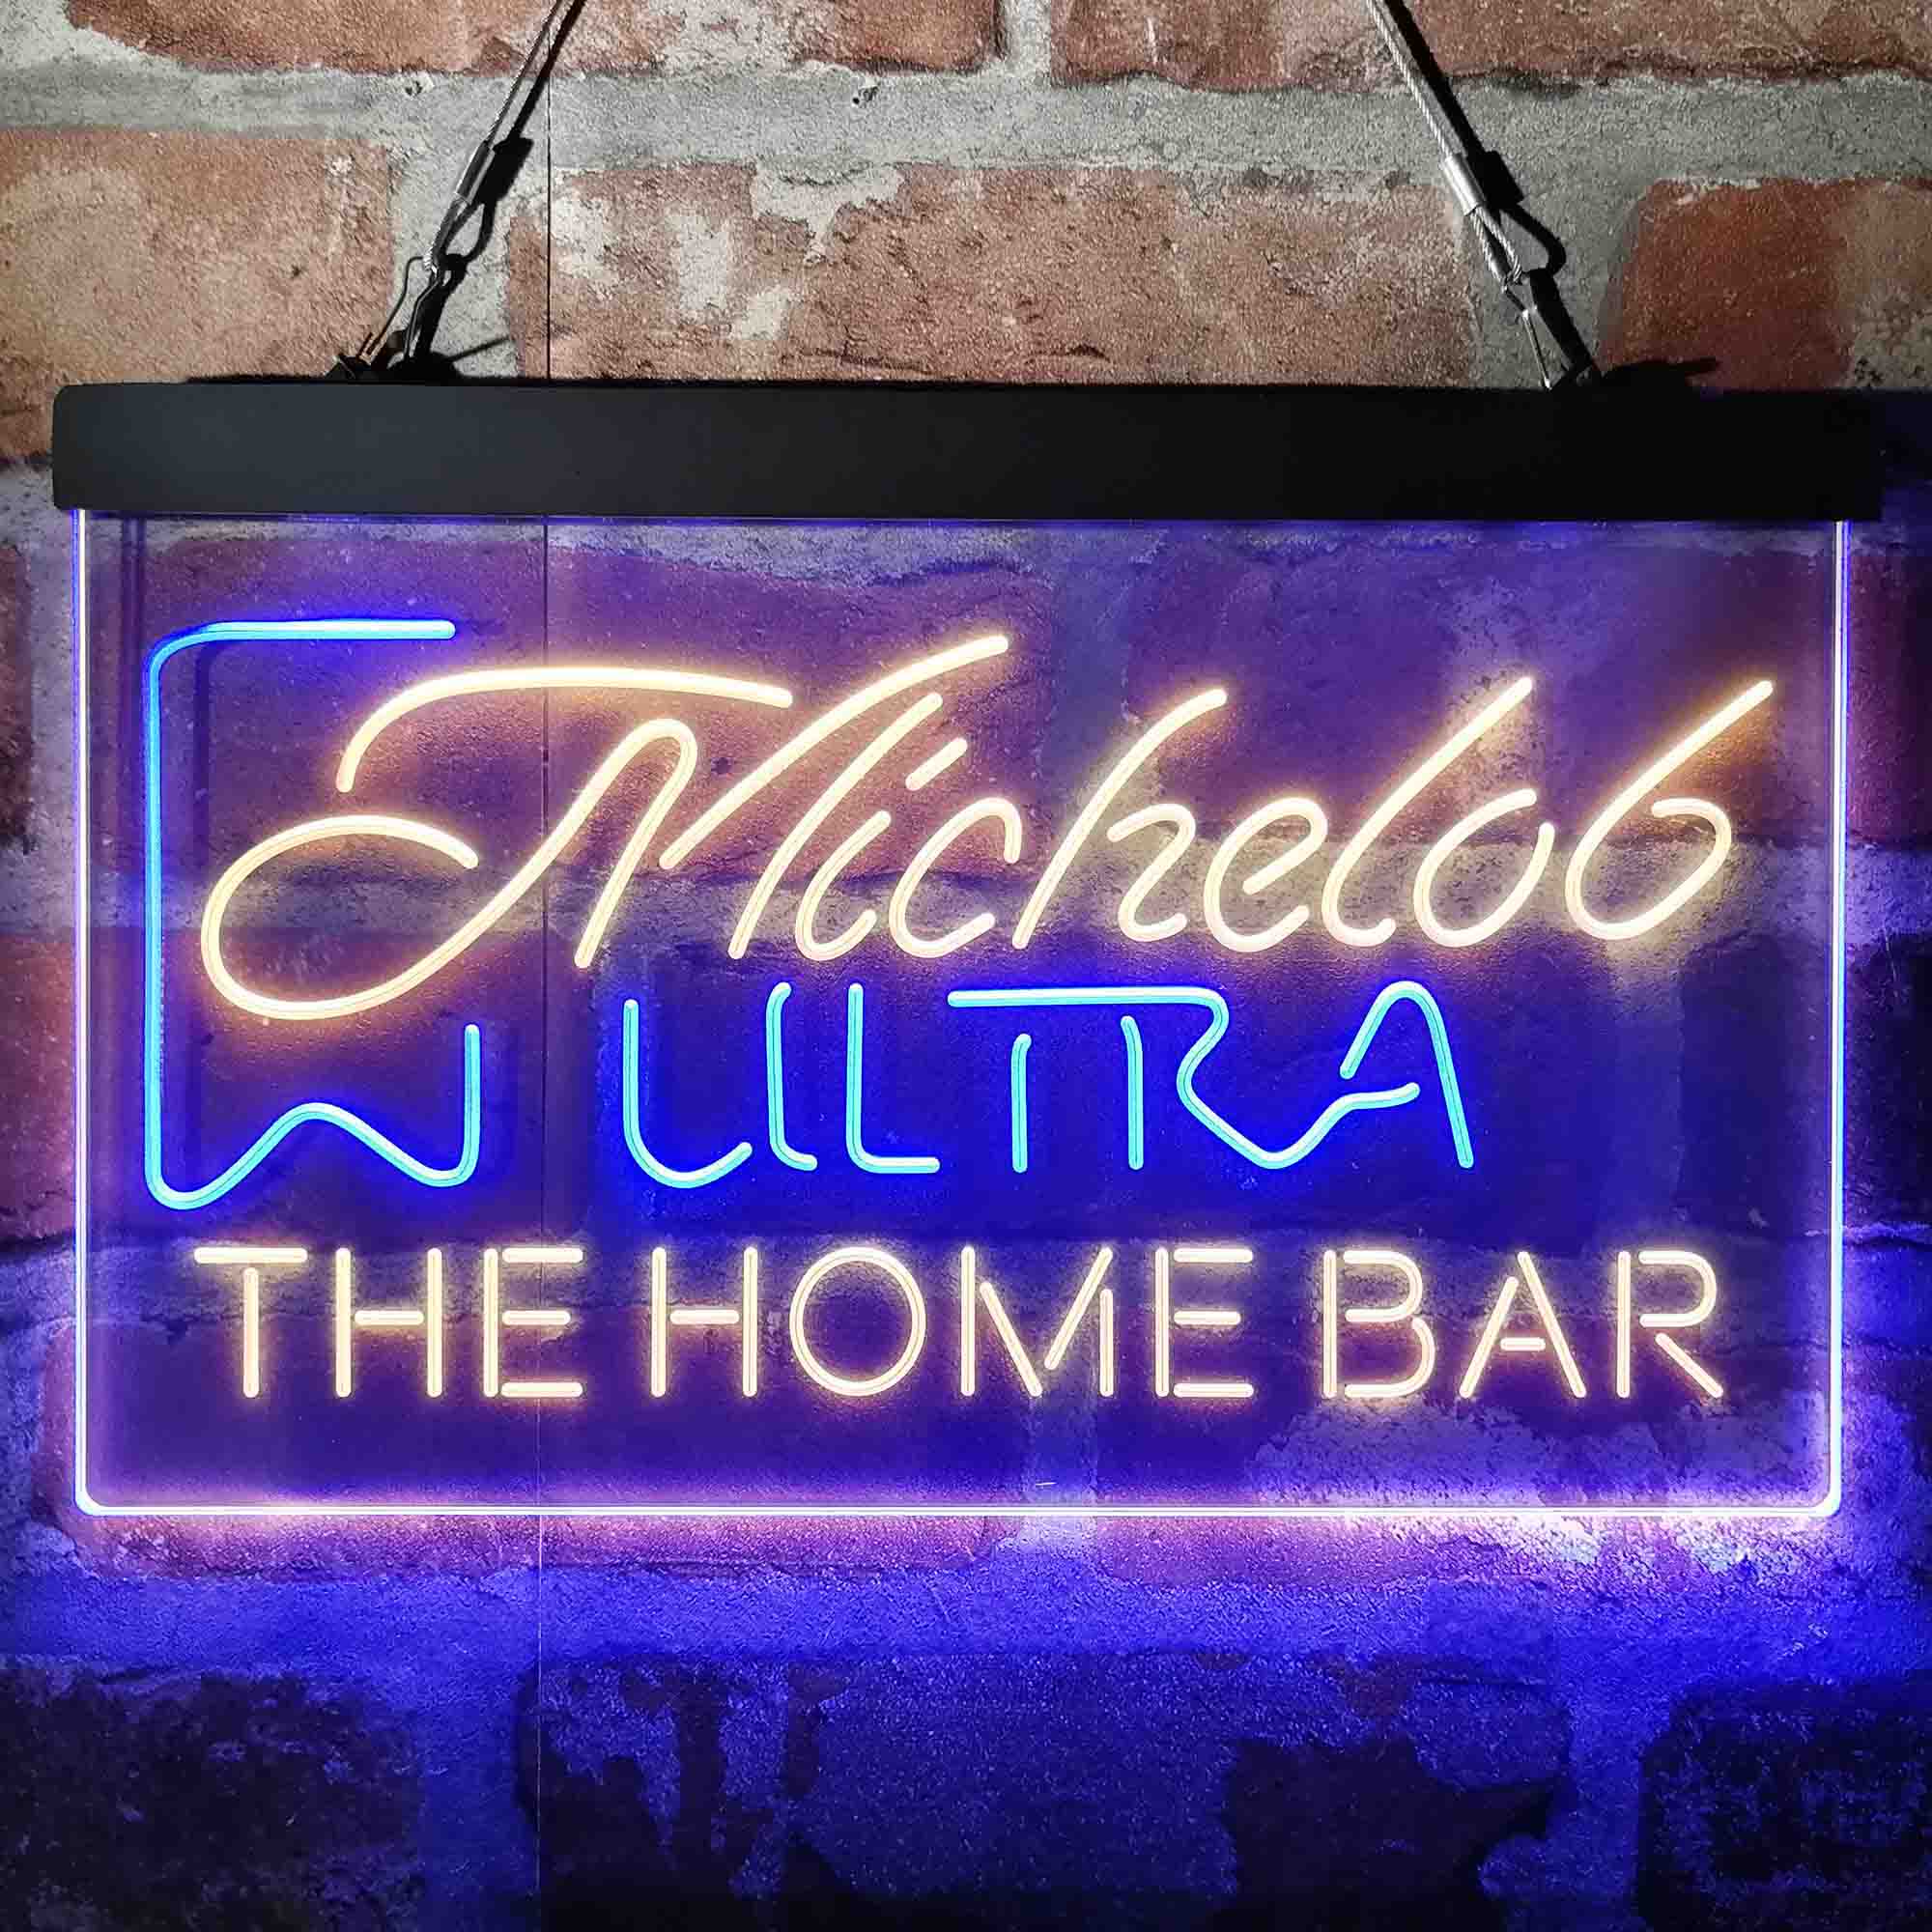 Personalized Michelob Ultra Neon LED Sign